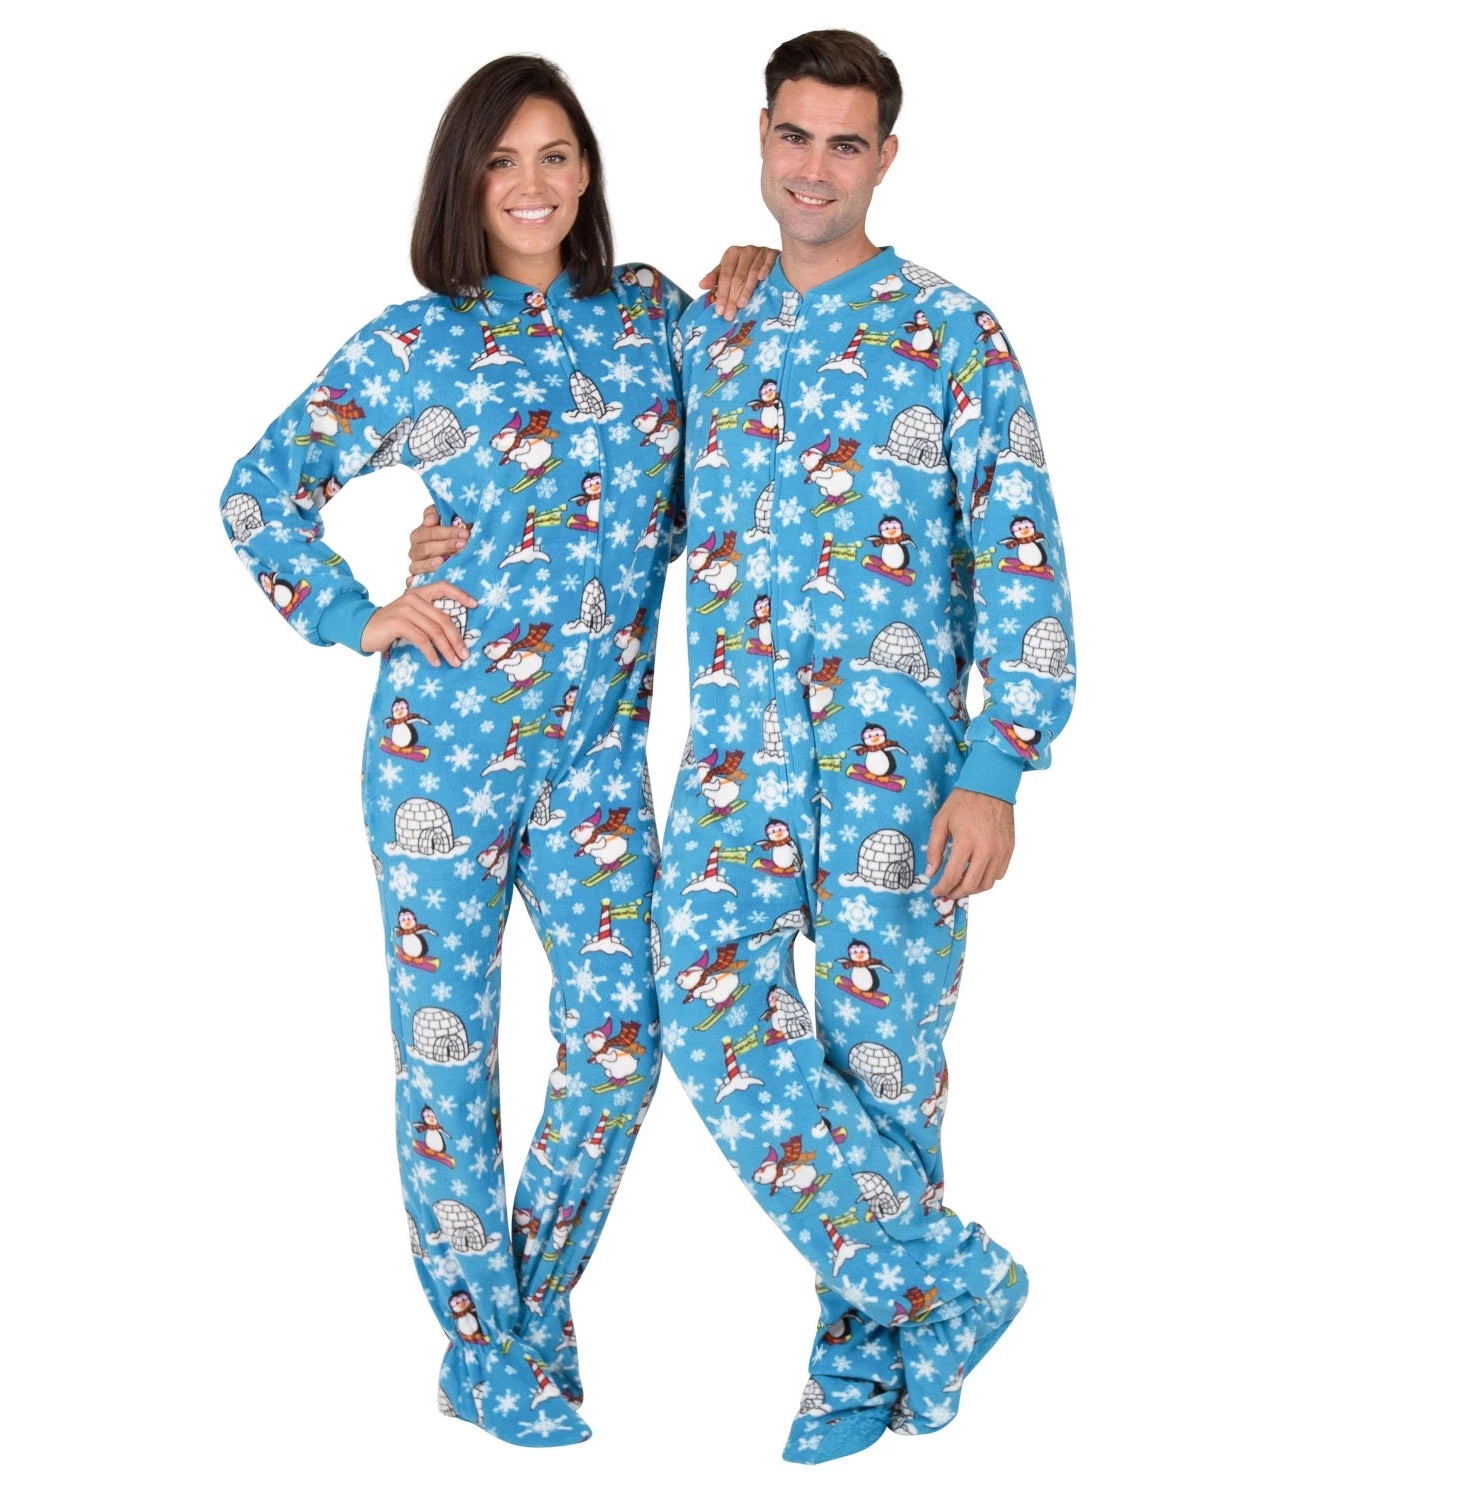 Winter Wonderland - Family Matching Footed Pajamas  Onesies for Boys,  Girls, Men, Women and Pets - Footed Pajamas Co.